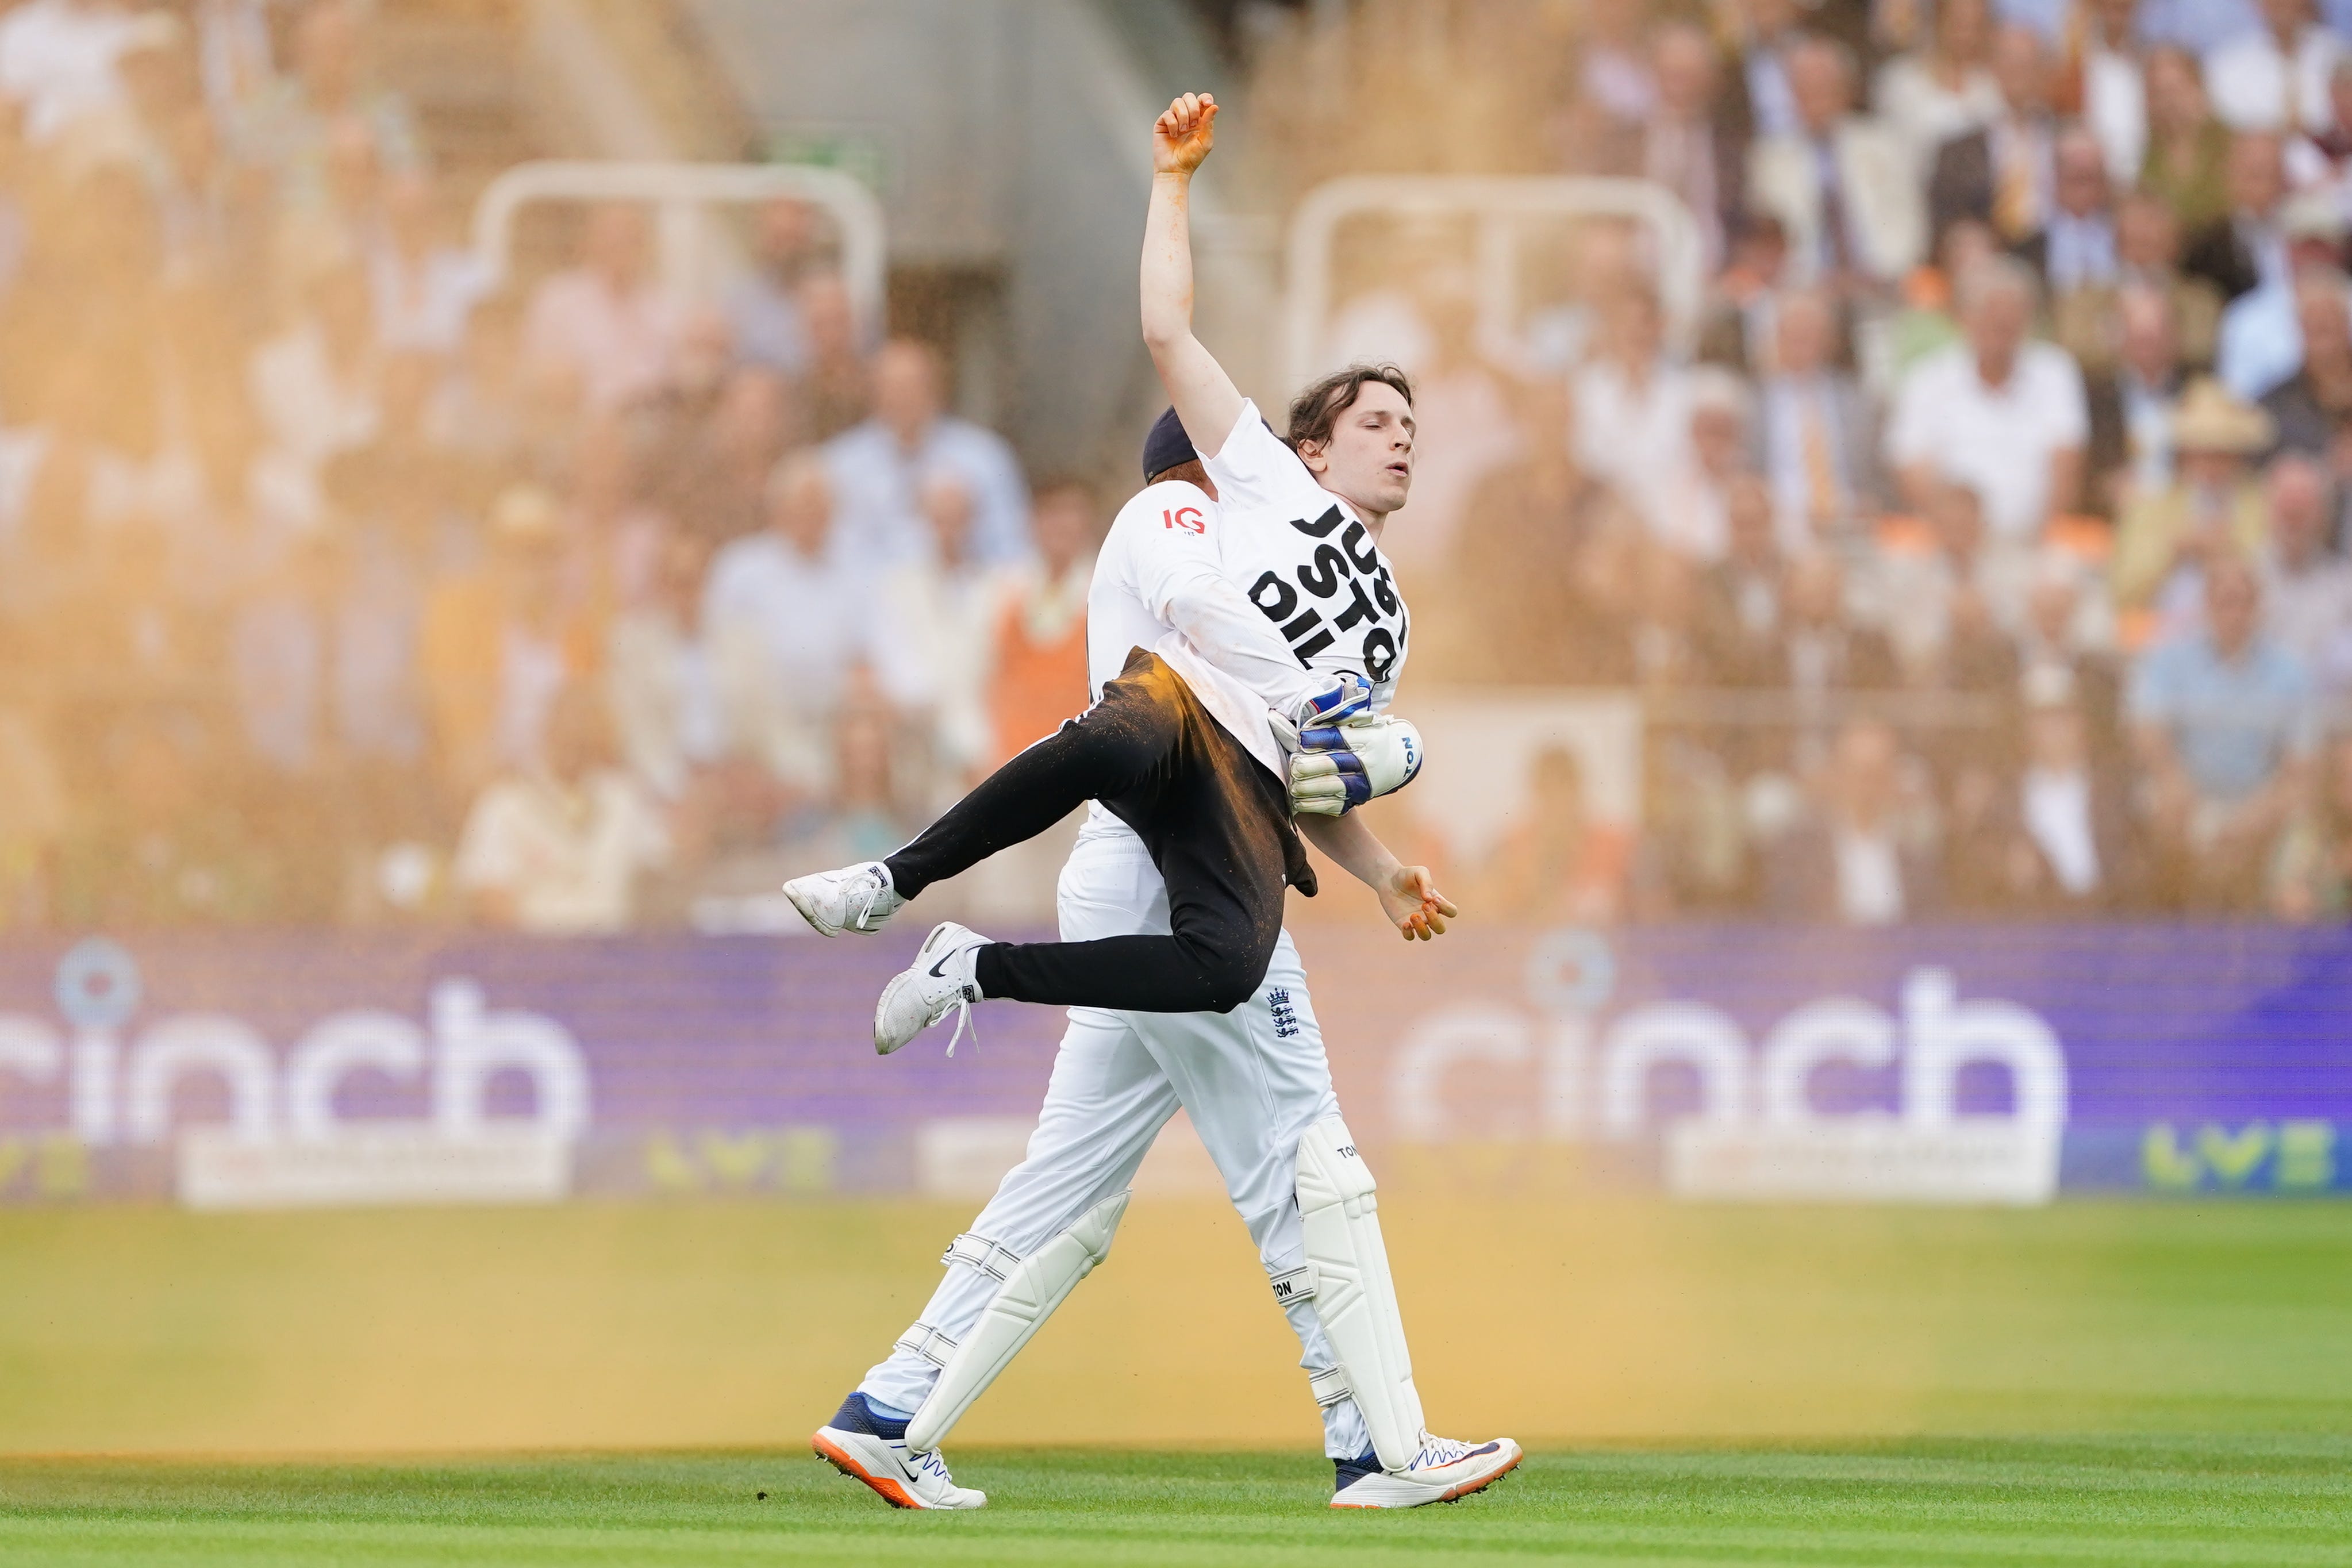 England’s Johnny Bairstow carrying a Just Stop Oil protester off the pitch during day one of the second Ashes test match at Lord’s (Mike Egerton/PA)